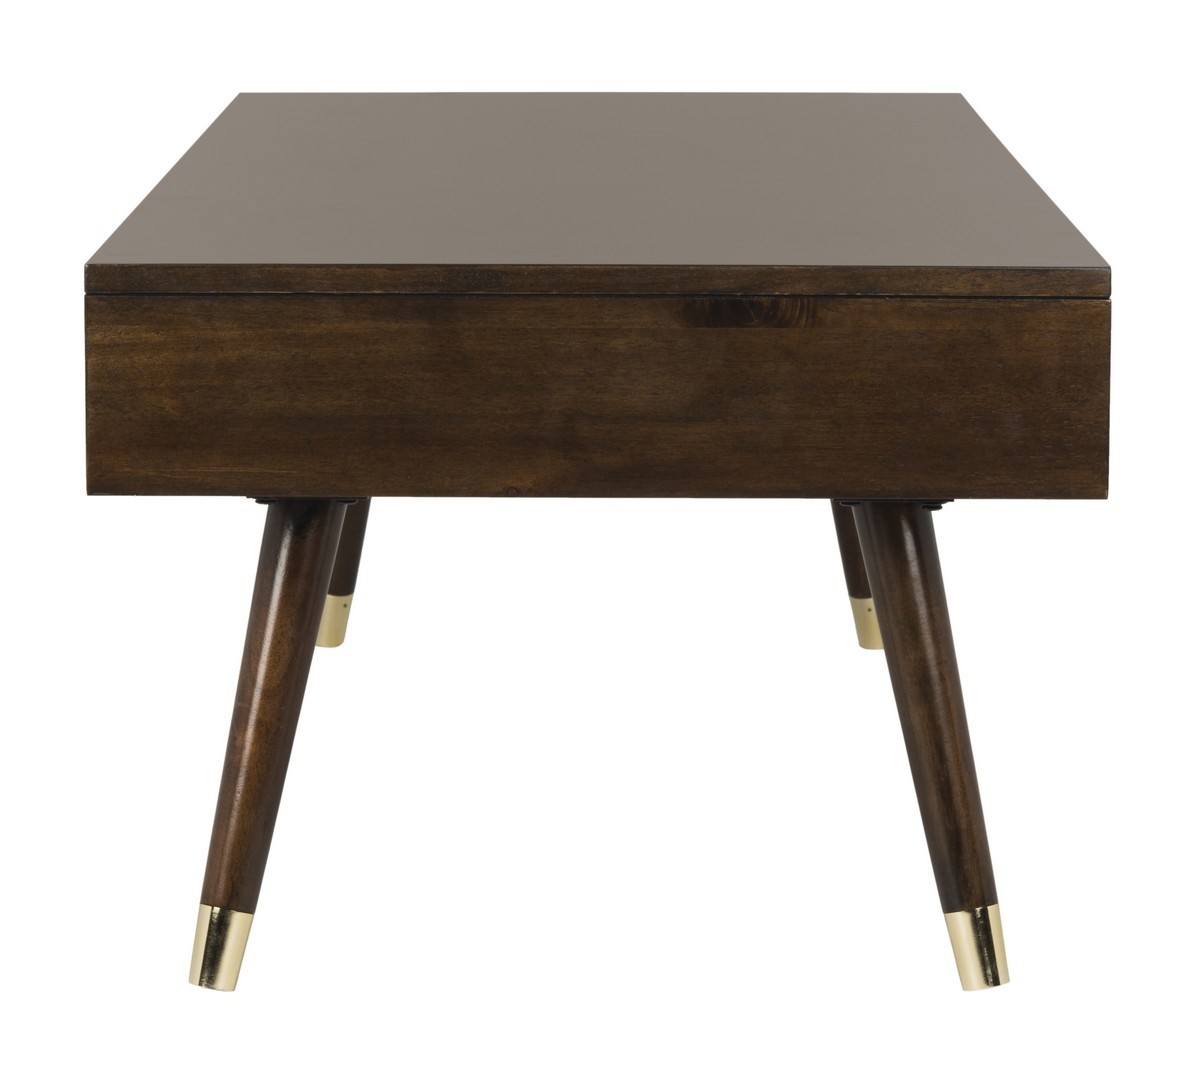 LEVINSON GOLD CAP COFFEE TABLE - Image 3